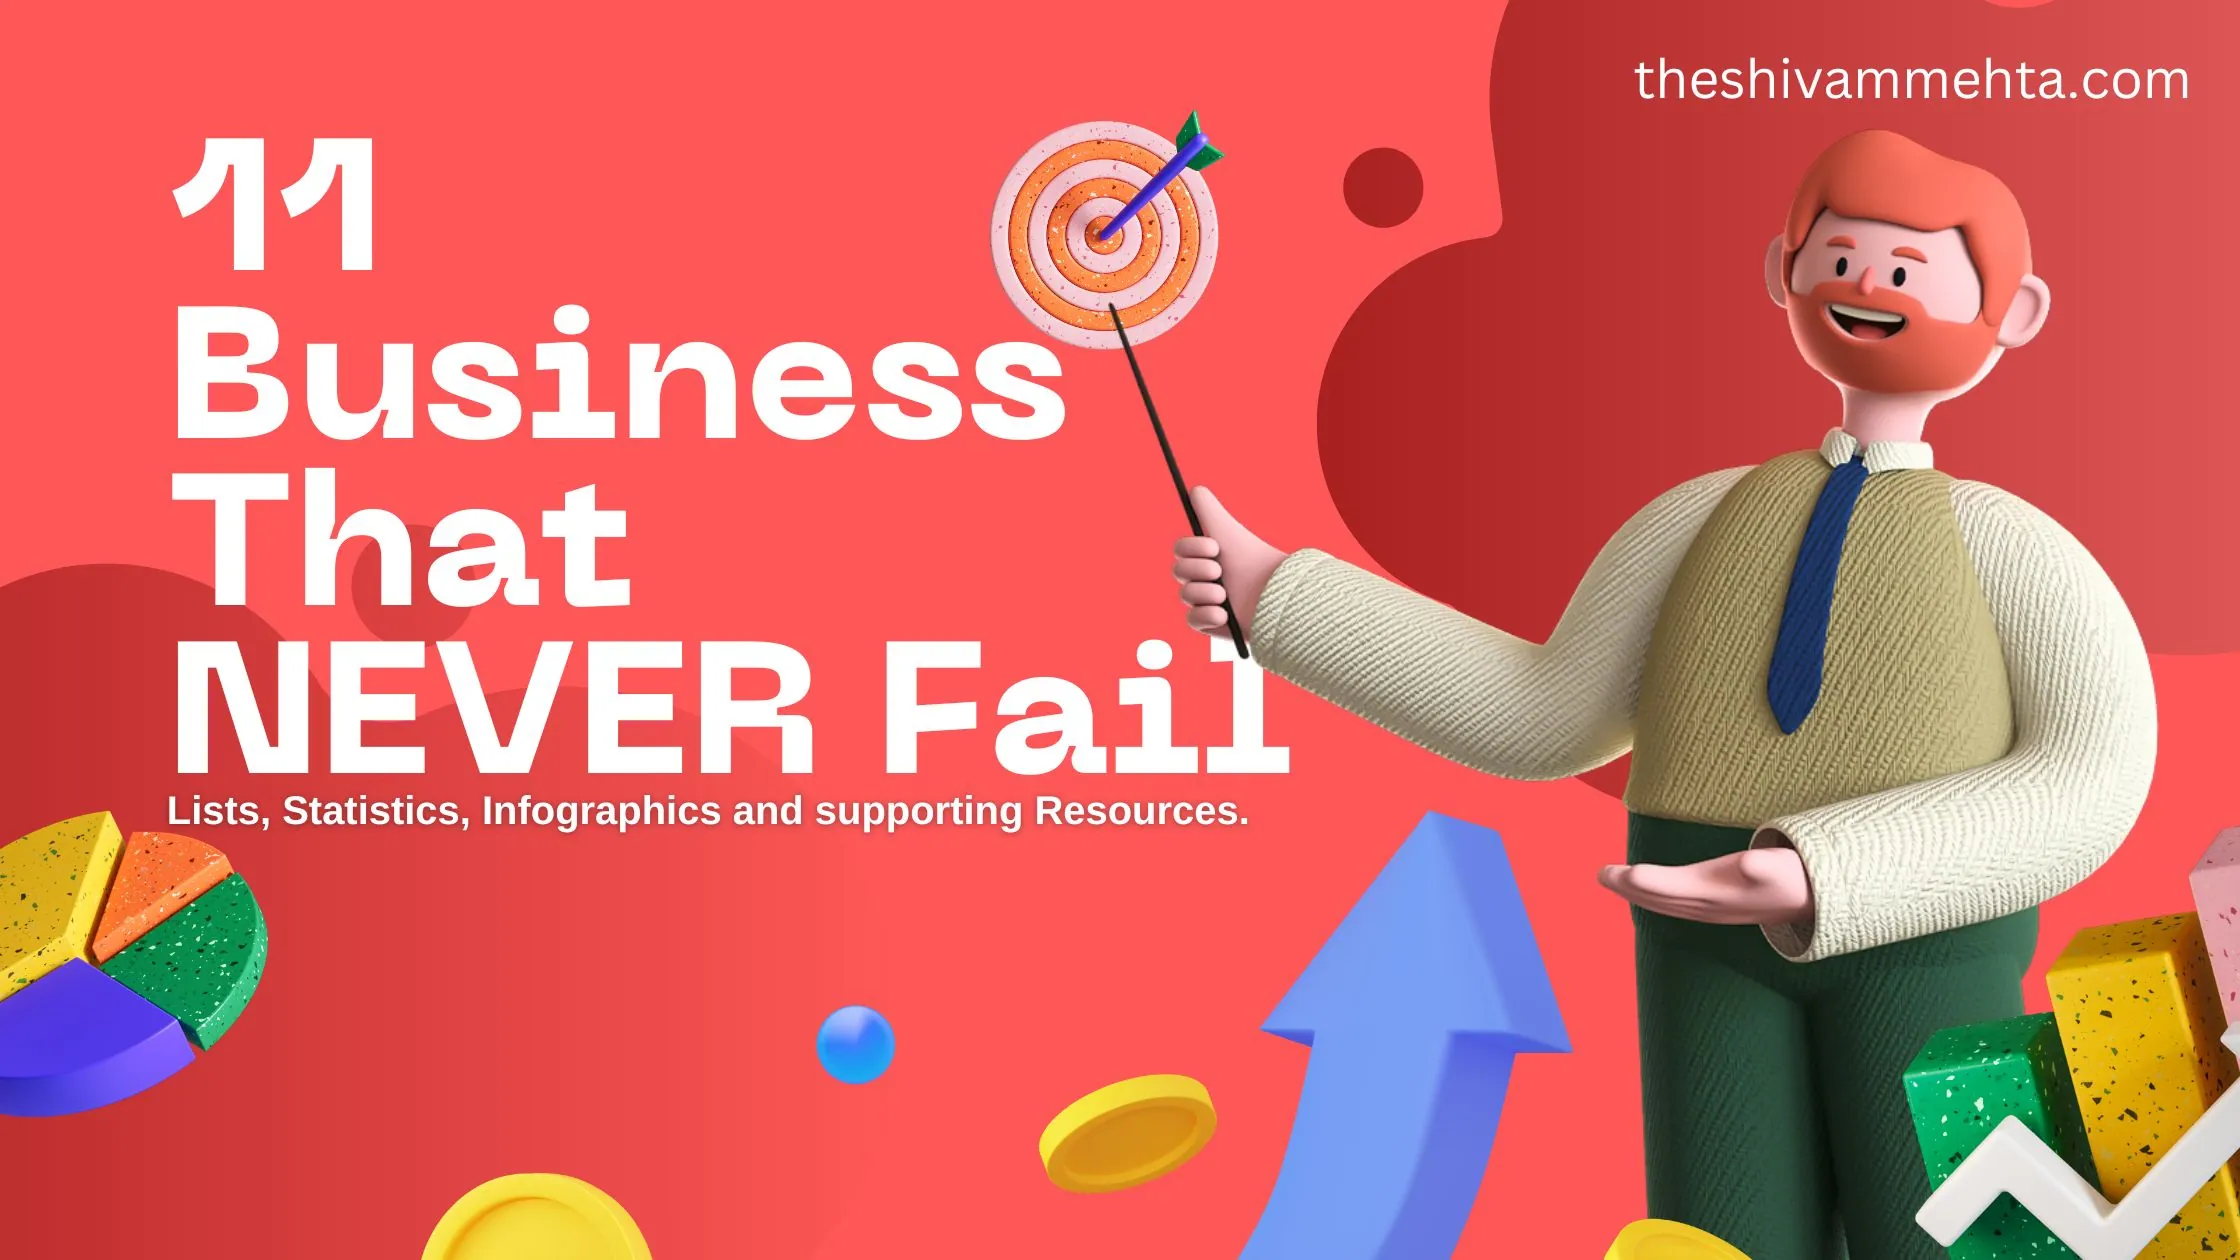 11 Business that never fail